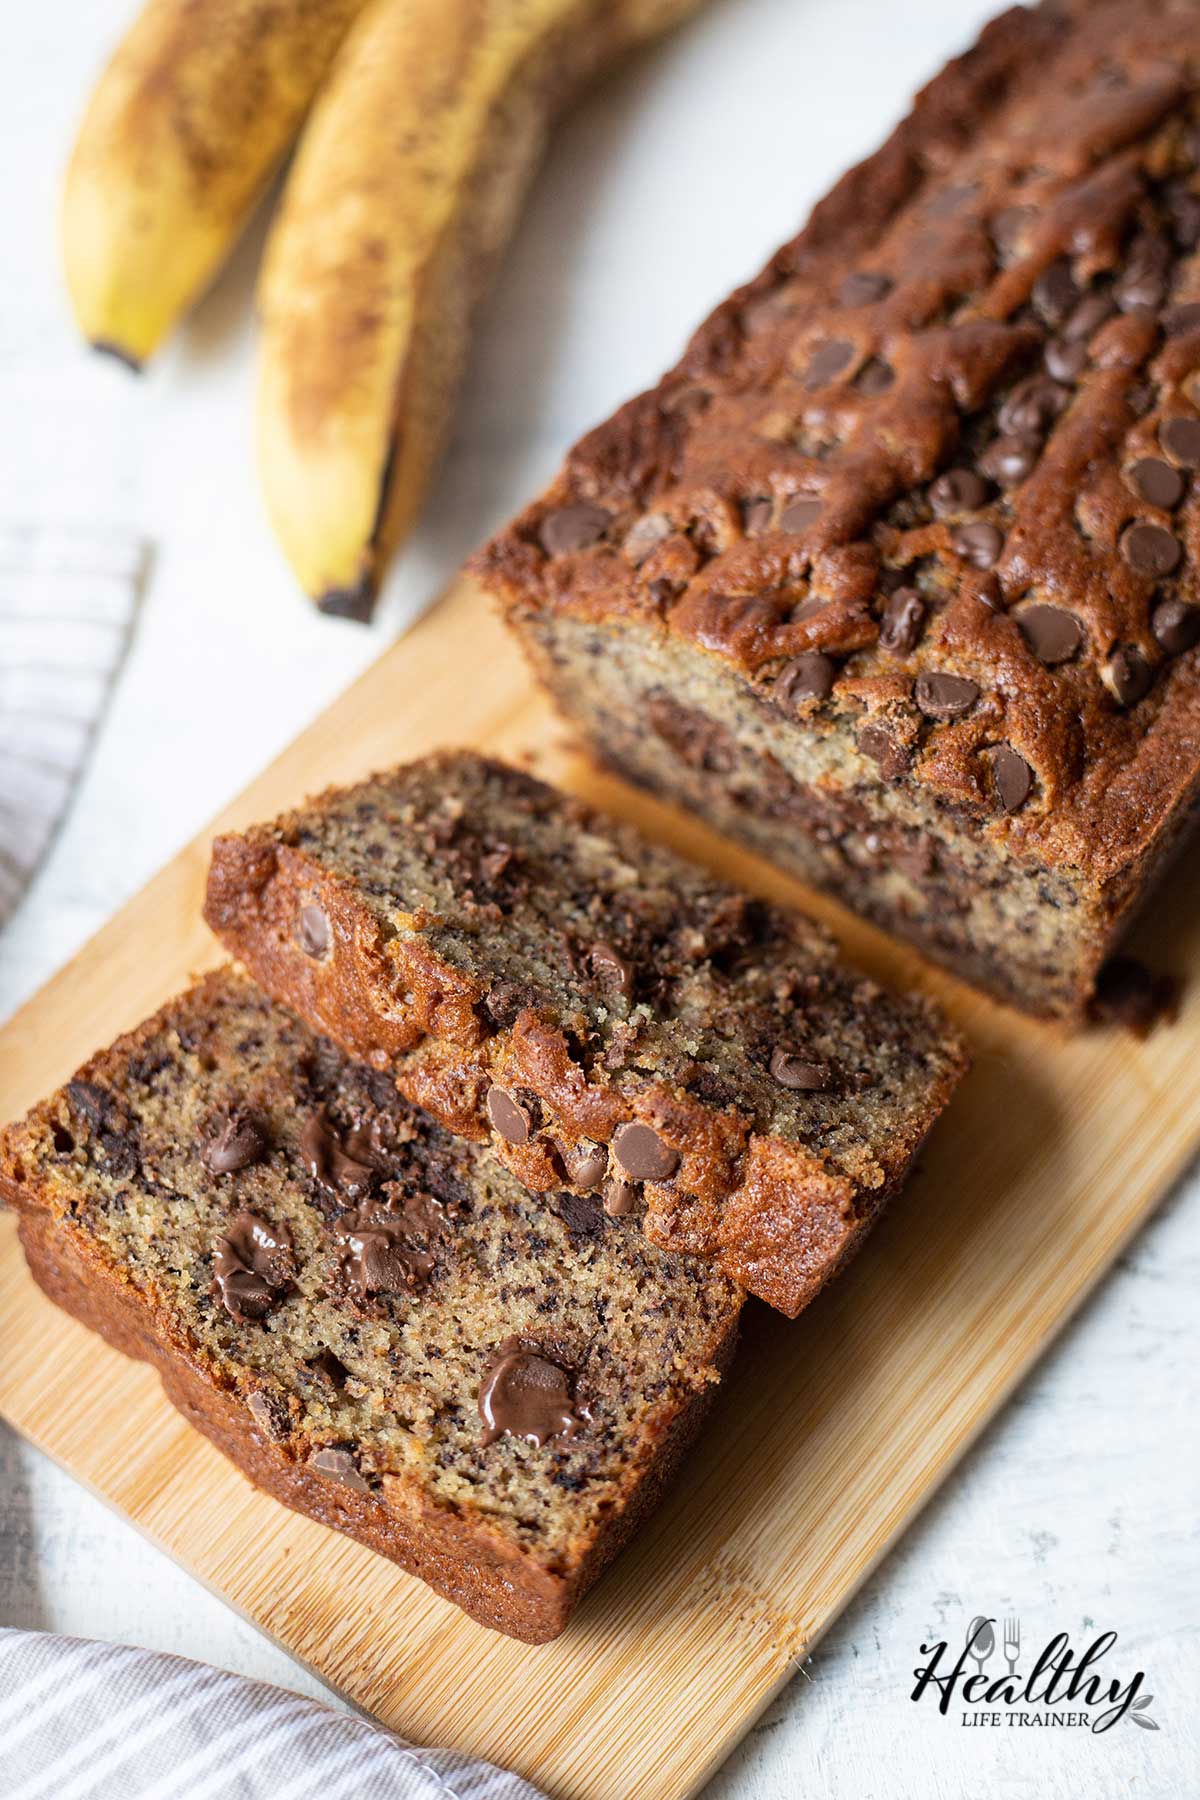 Chocolate chips banana bread slices.